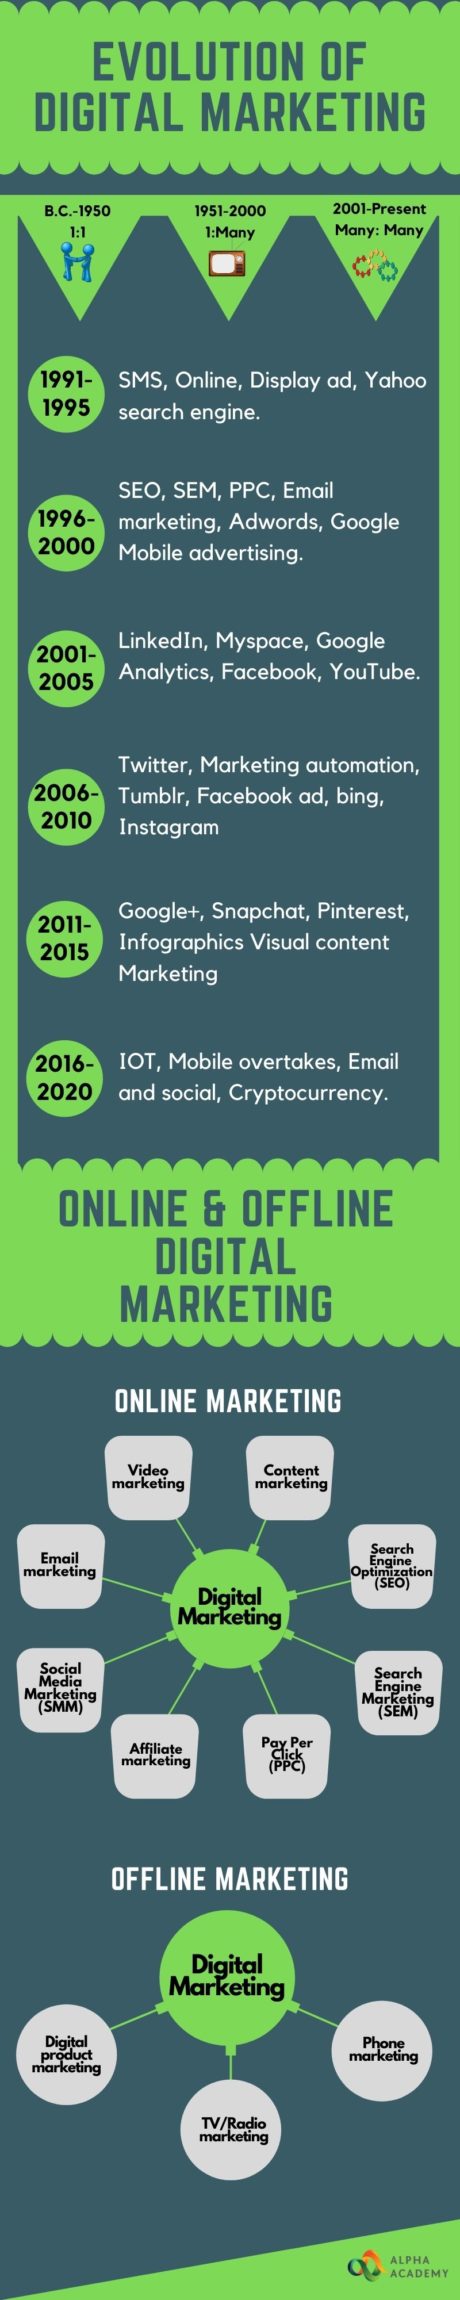 Infographics on Digital Marketing Evolution and branches